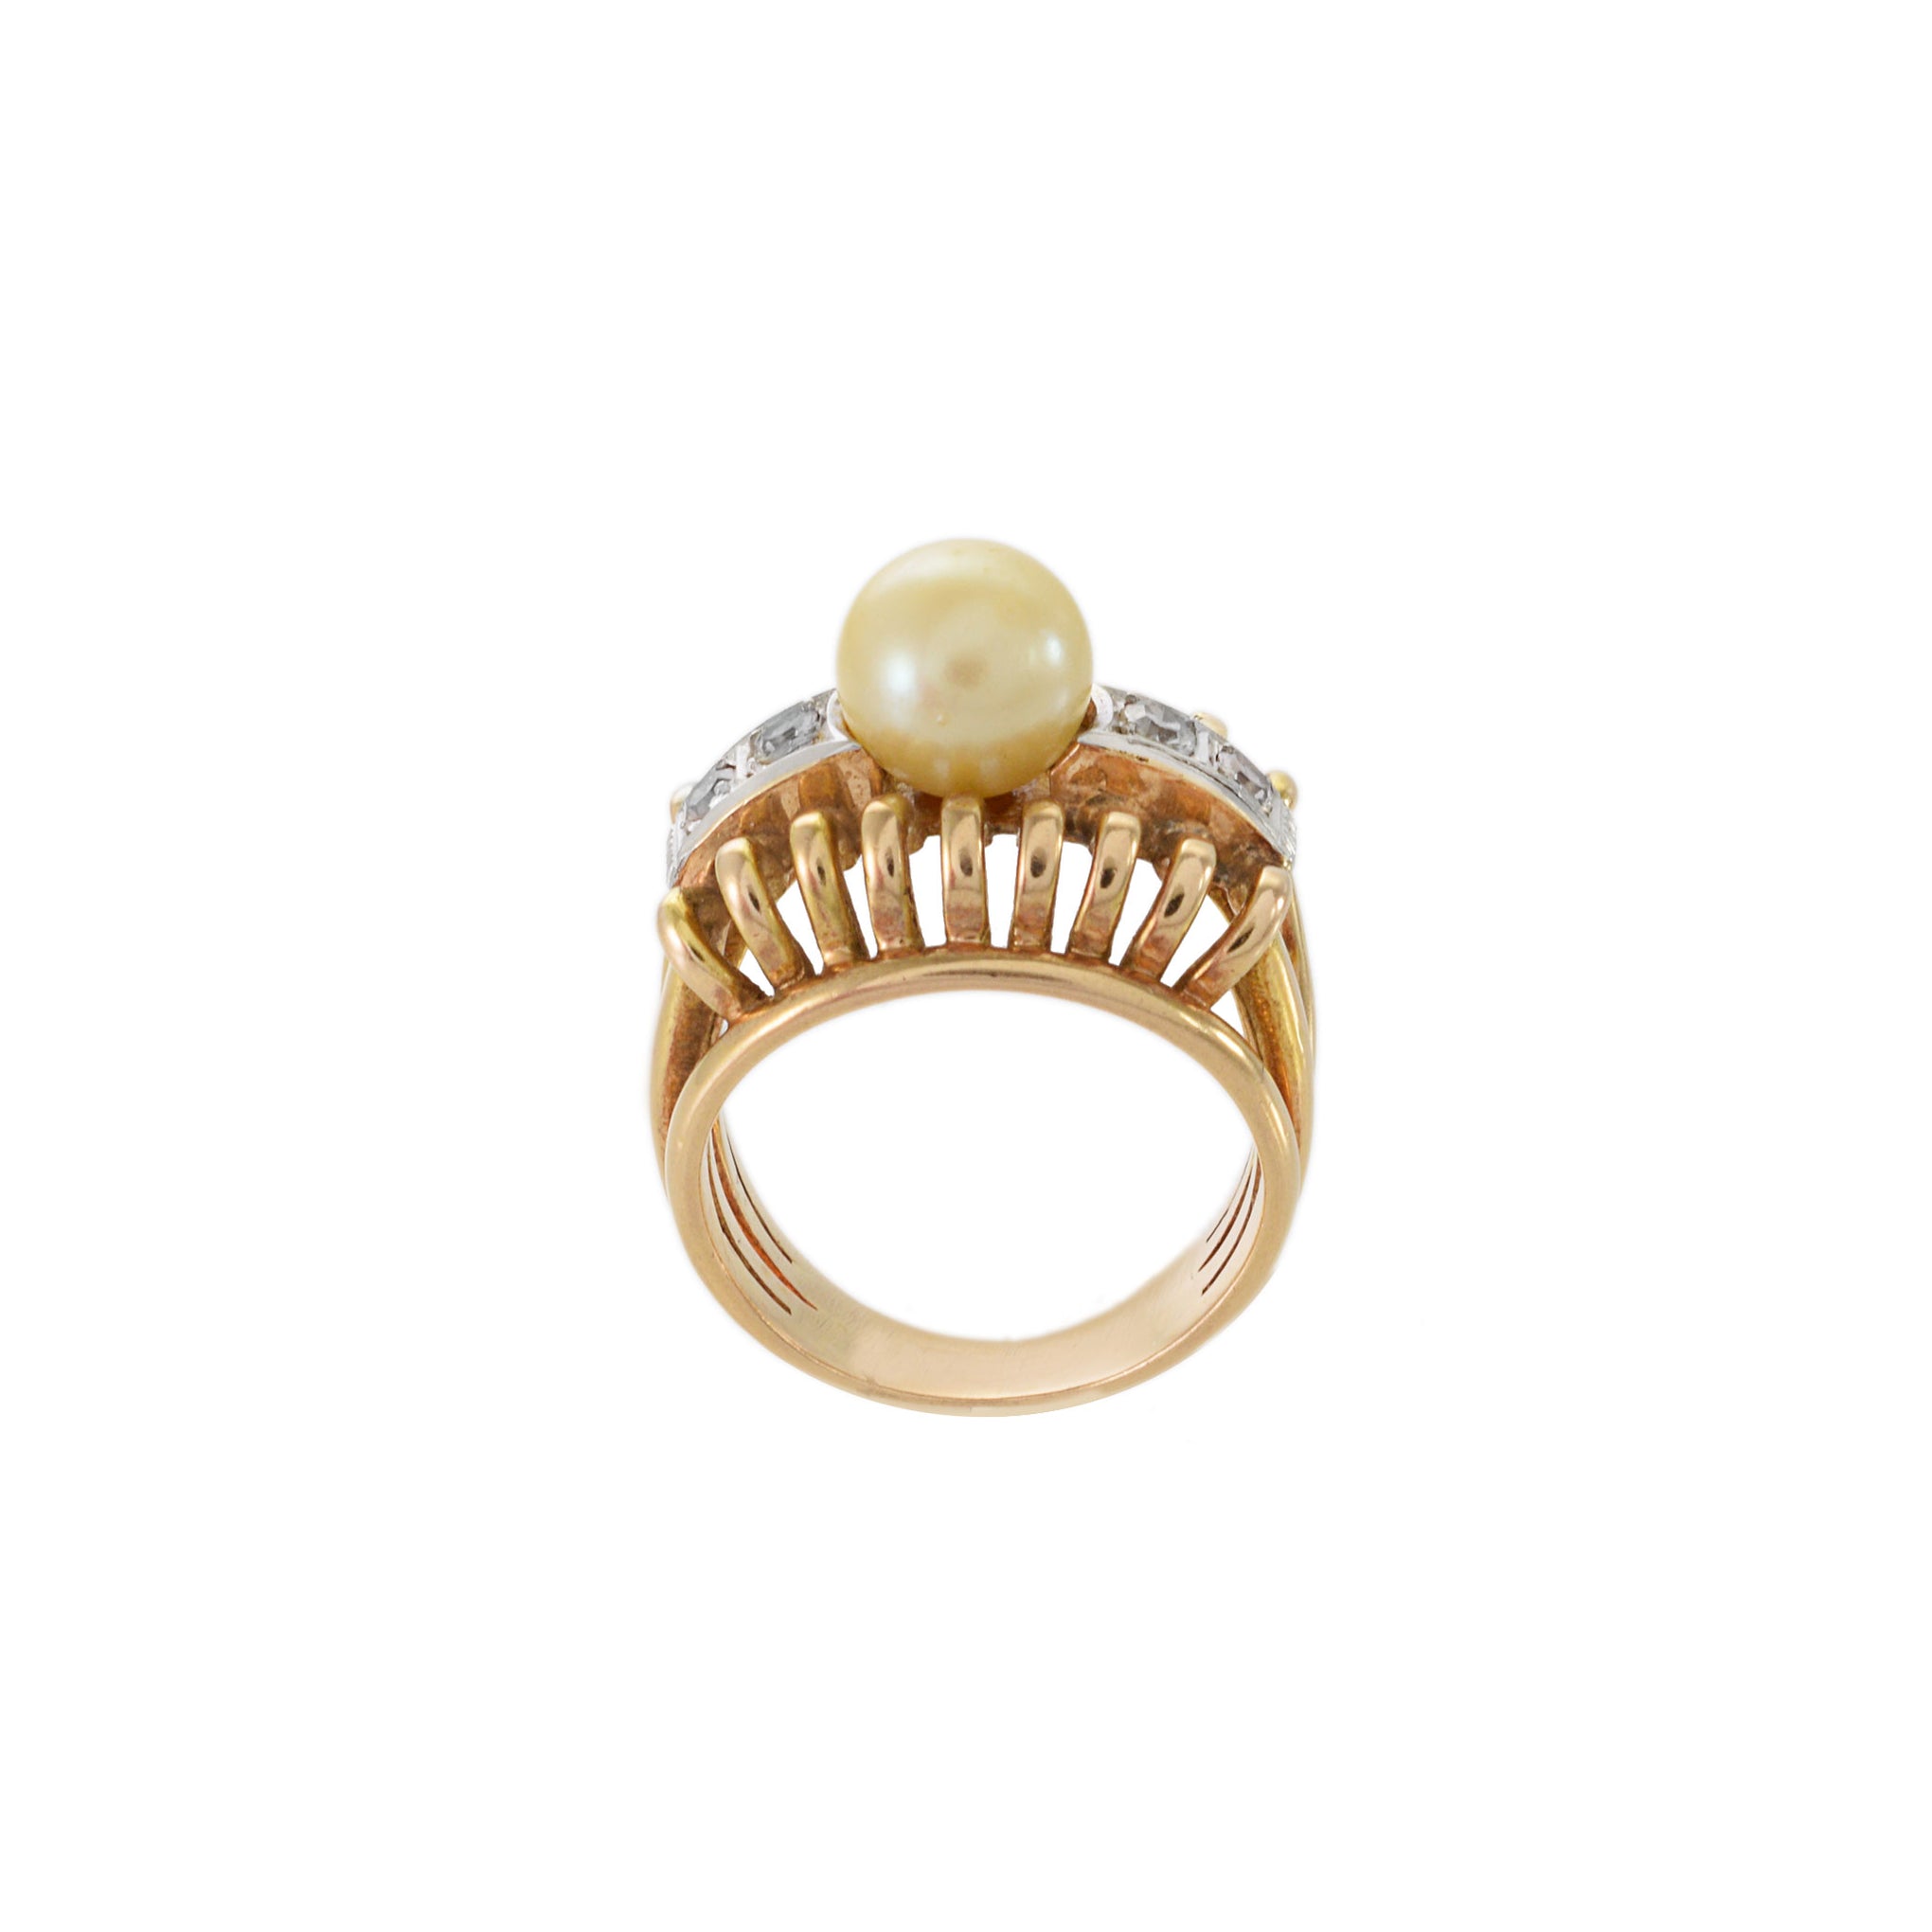 Vintage Antique Victorian Era 18KT Yellow Gold And Platinum Pearl Diamond Ring